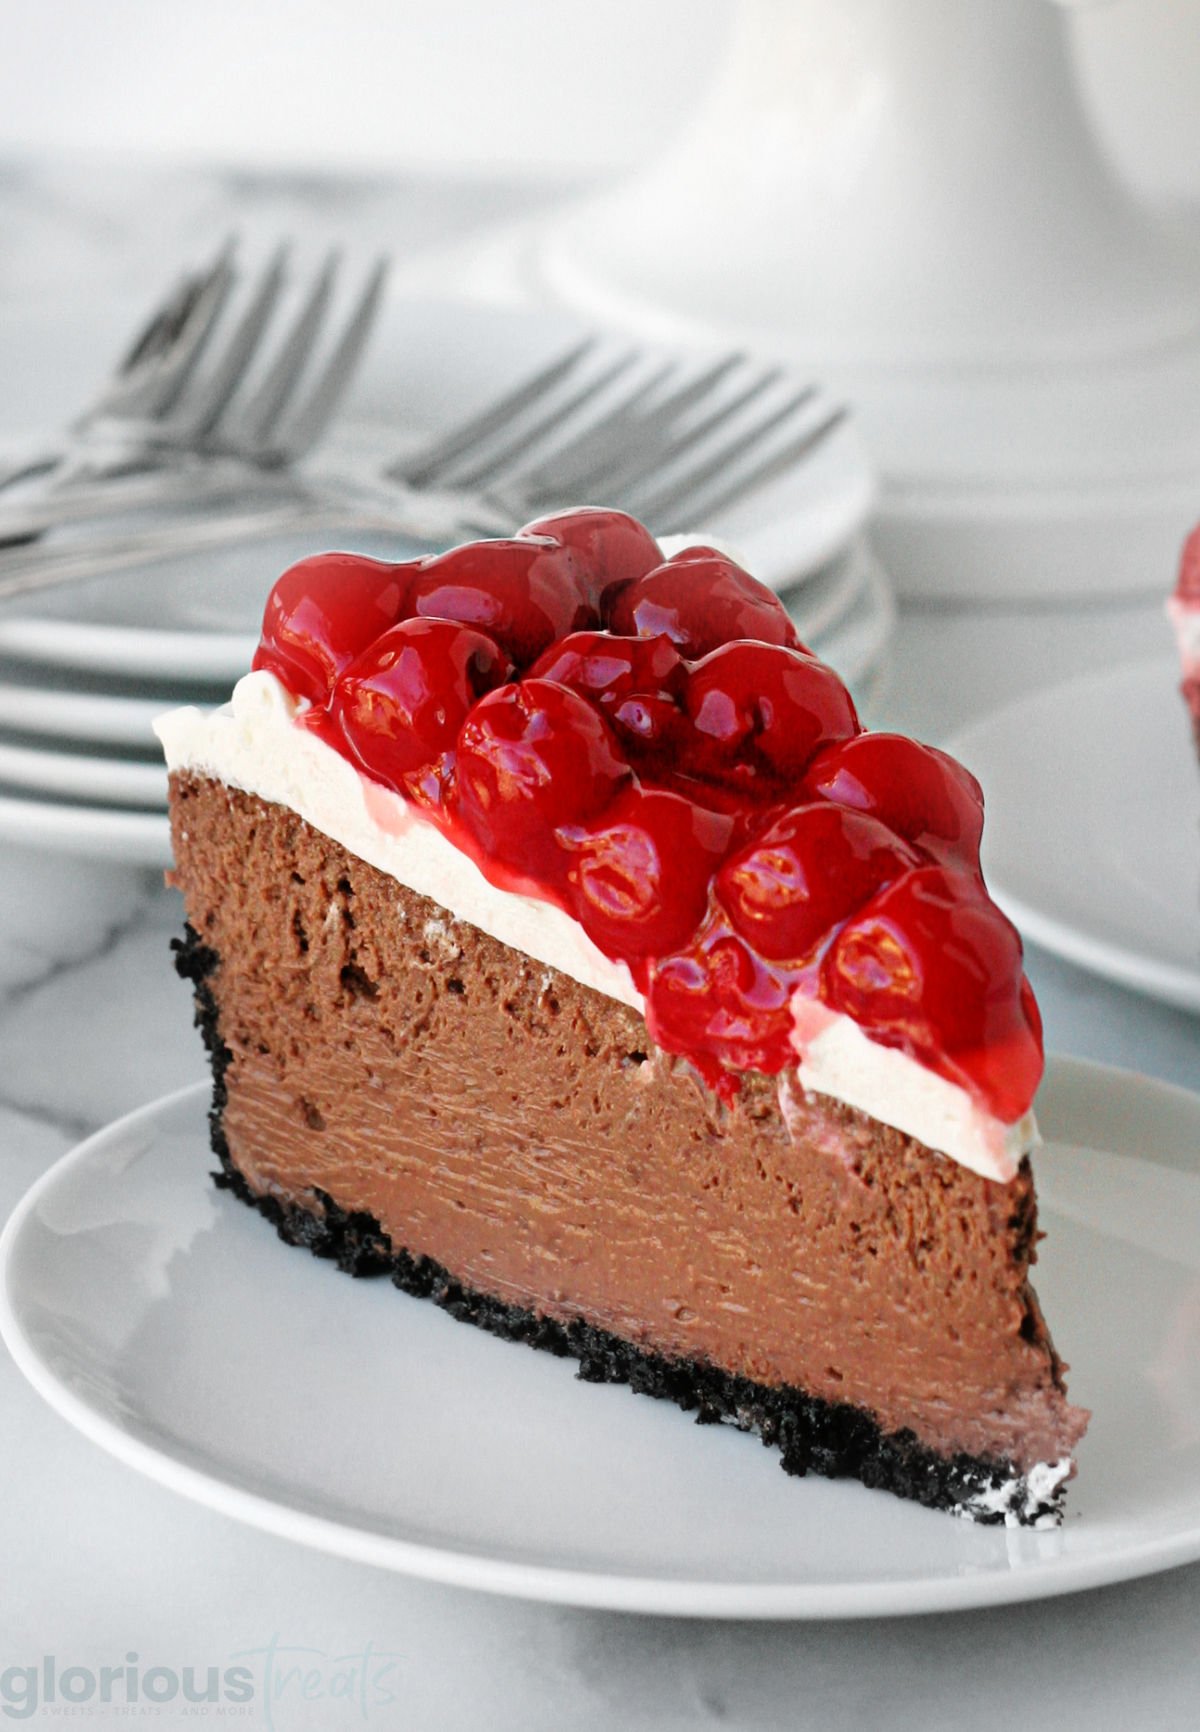 generous sized slice of black forest cheesecake sitting on white round plate with more plates in the background.